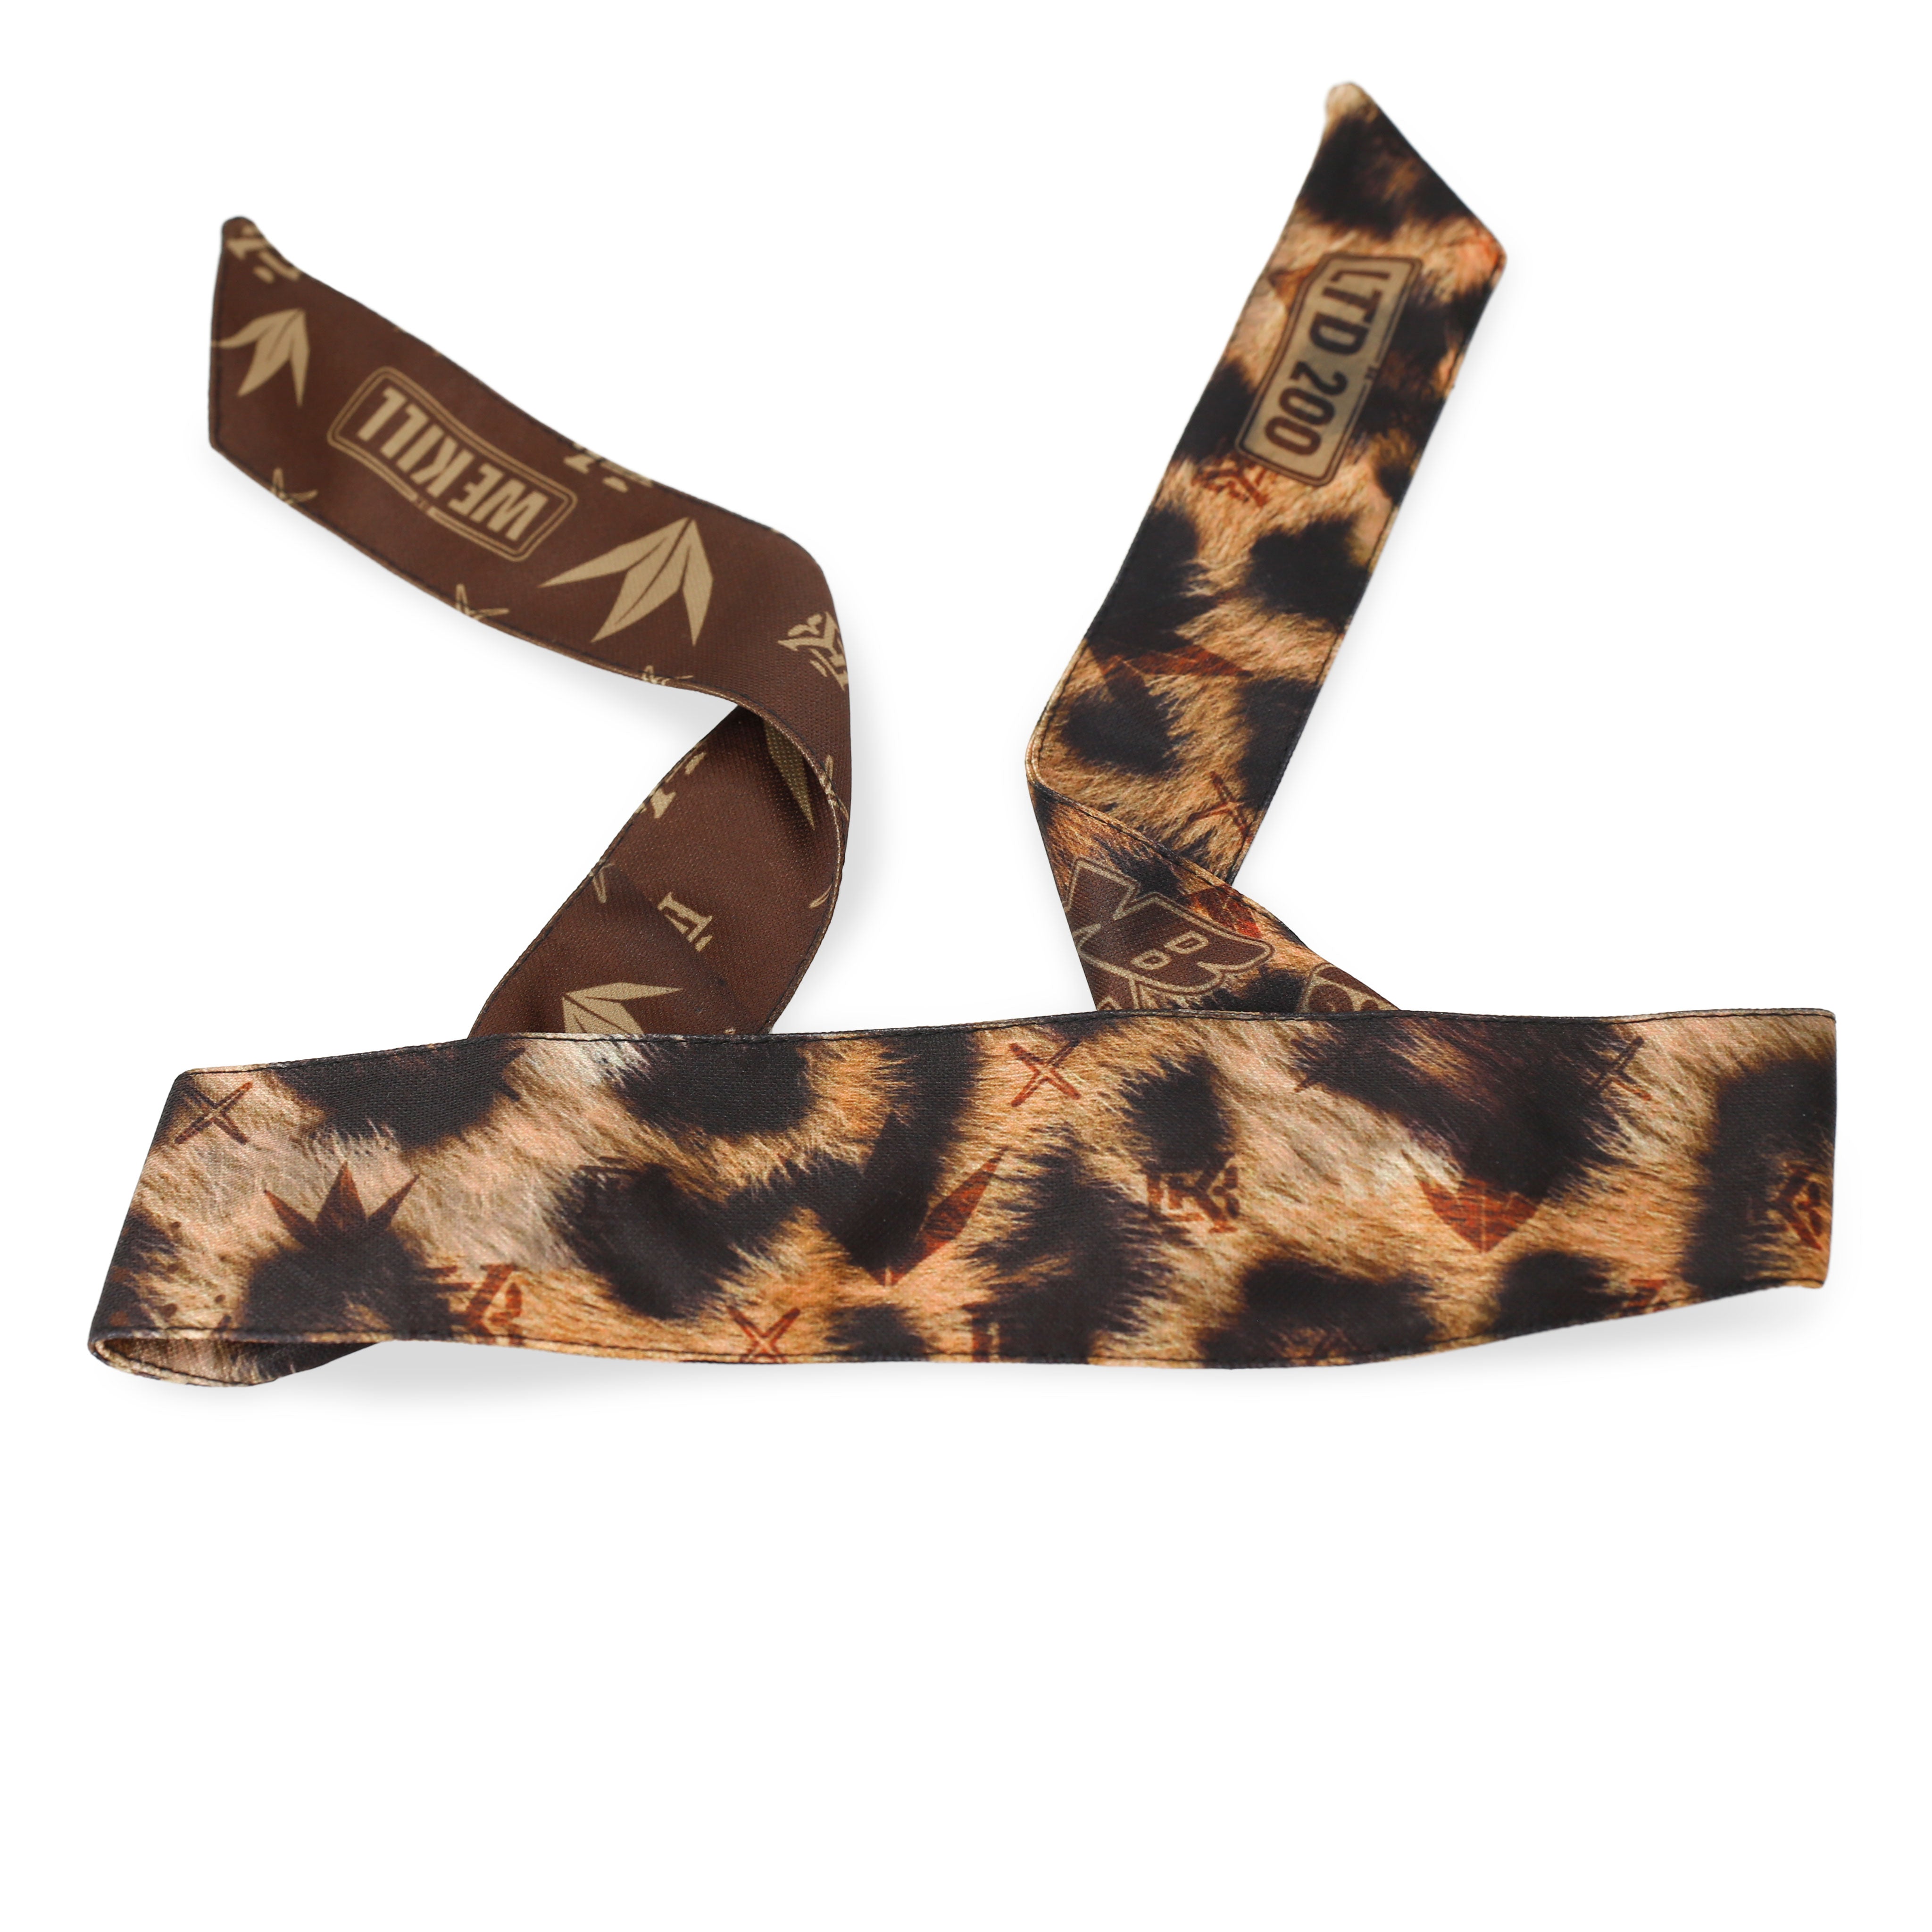 Leopard Coronation  4-Point Strap & Headband Pack - Limited to 200